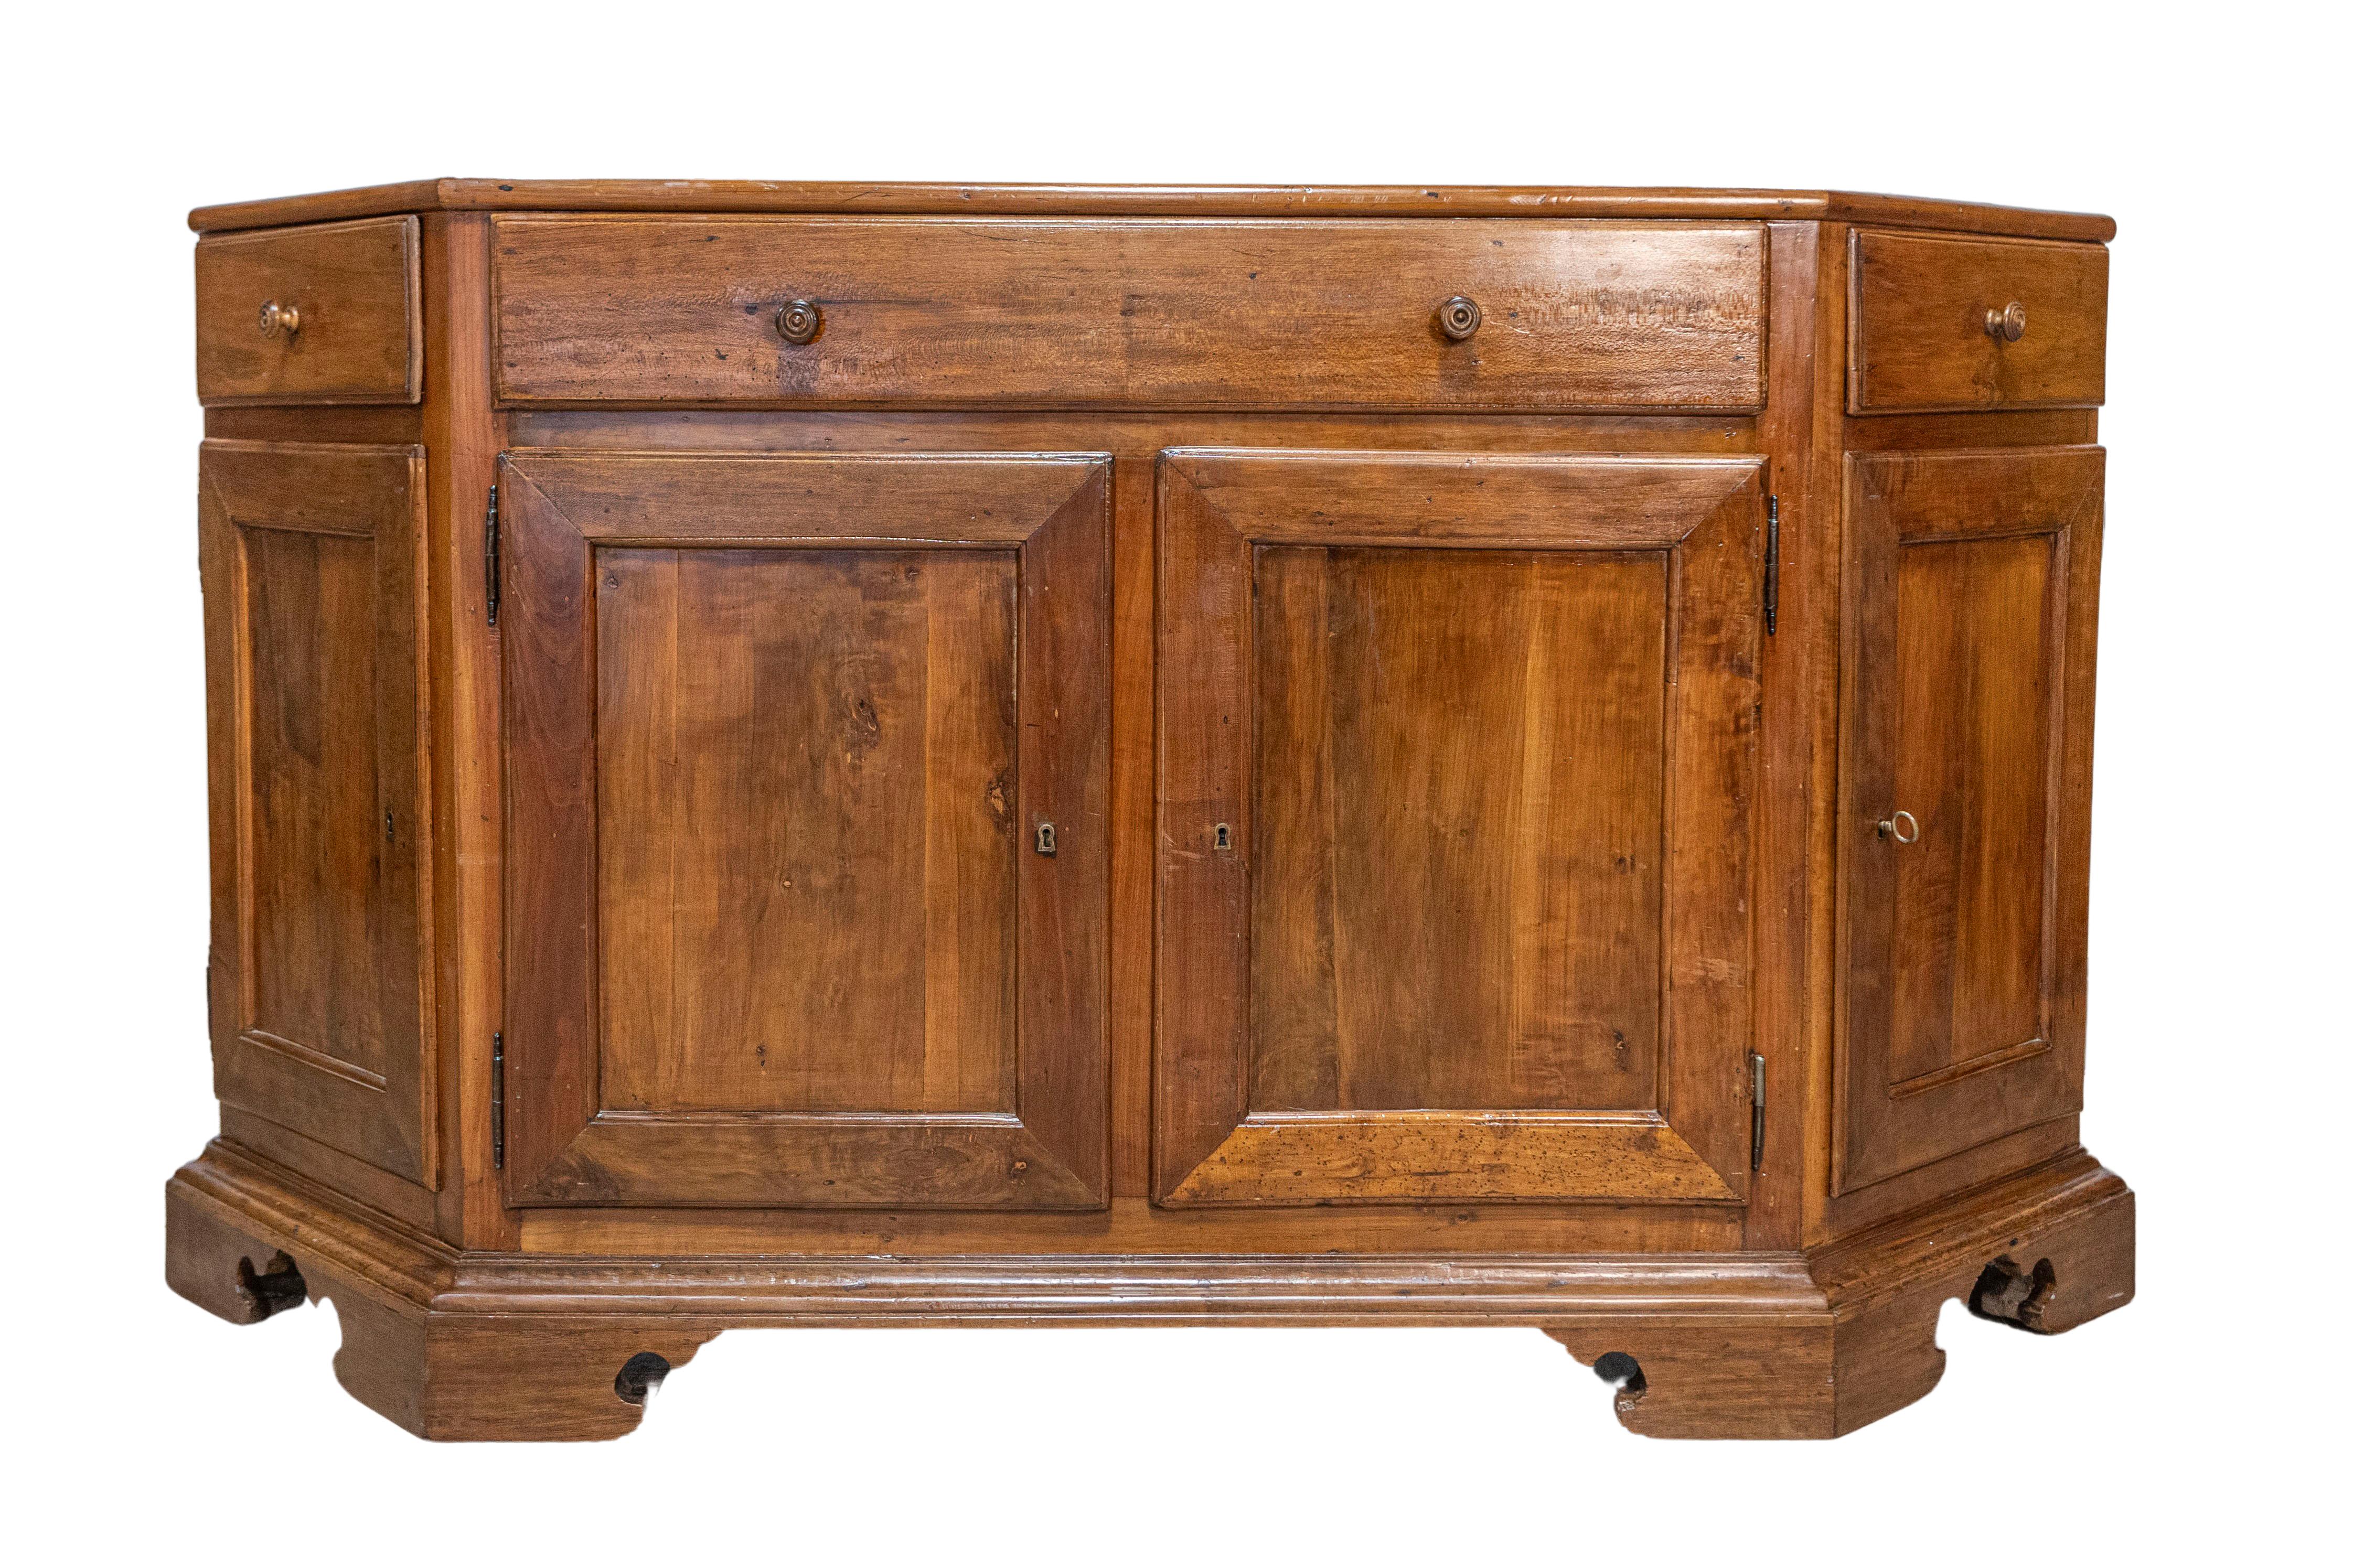 An Italian walnut credenza from the 19th century with three drawers over four doors and canted sides. This elegant 19th-century Italian walnut credenza combines functional design with traditional craftsmanship. Featuring three drawers over four